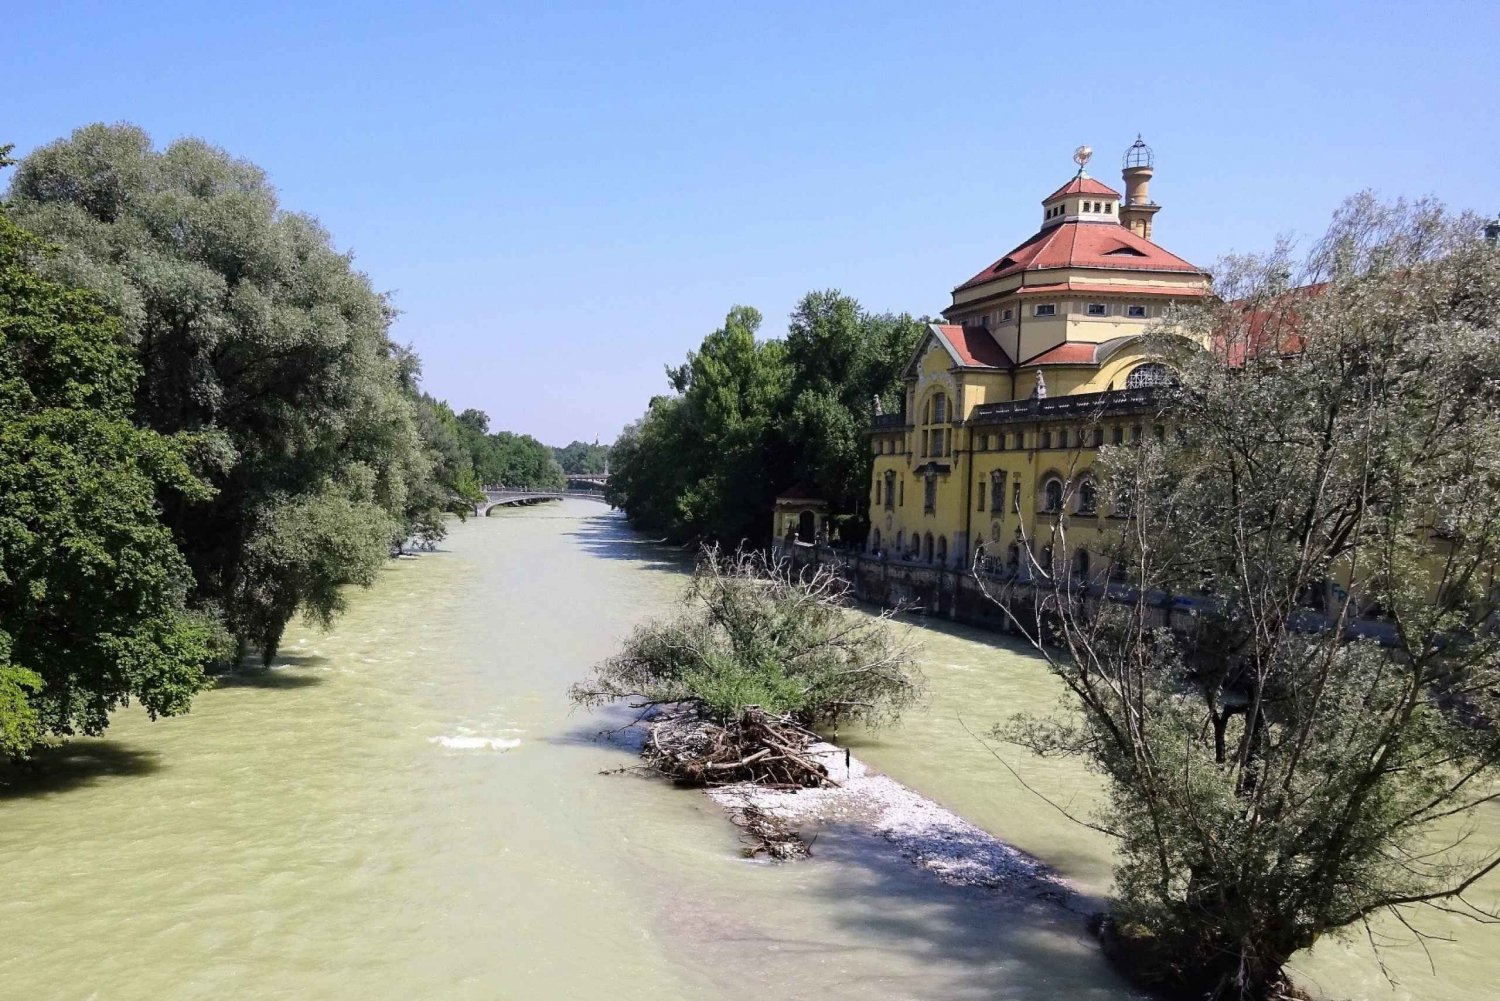 Enjoy-a-Boat-Ride-on-the-Isar-River